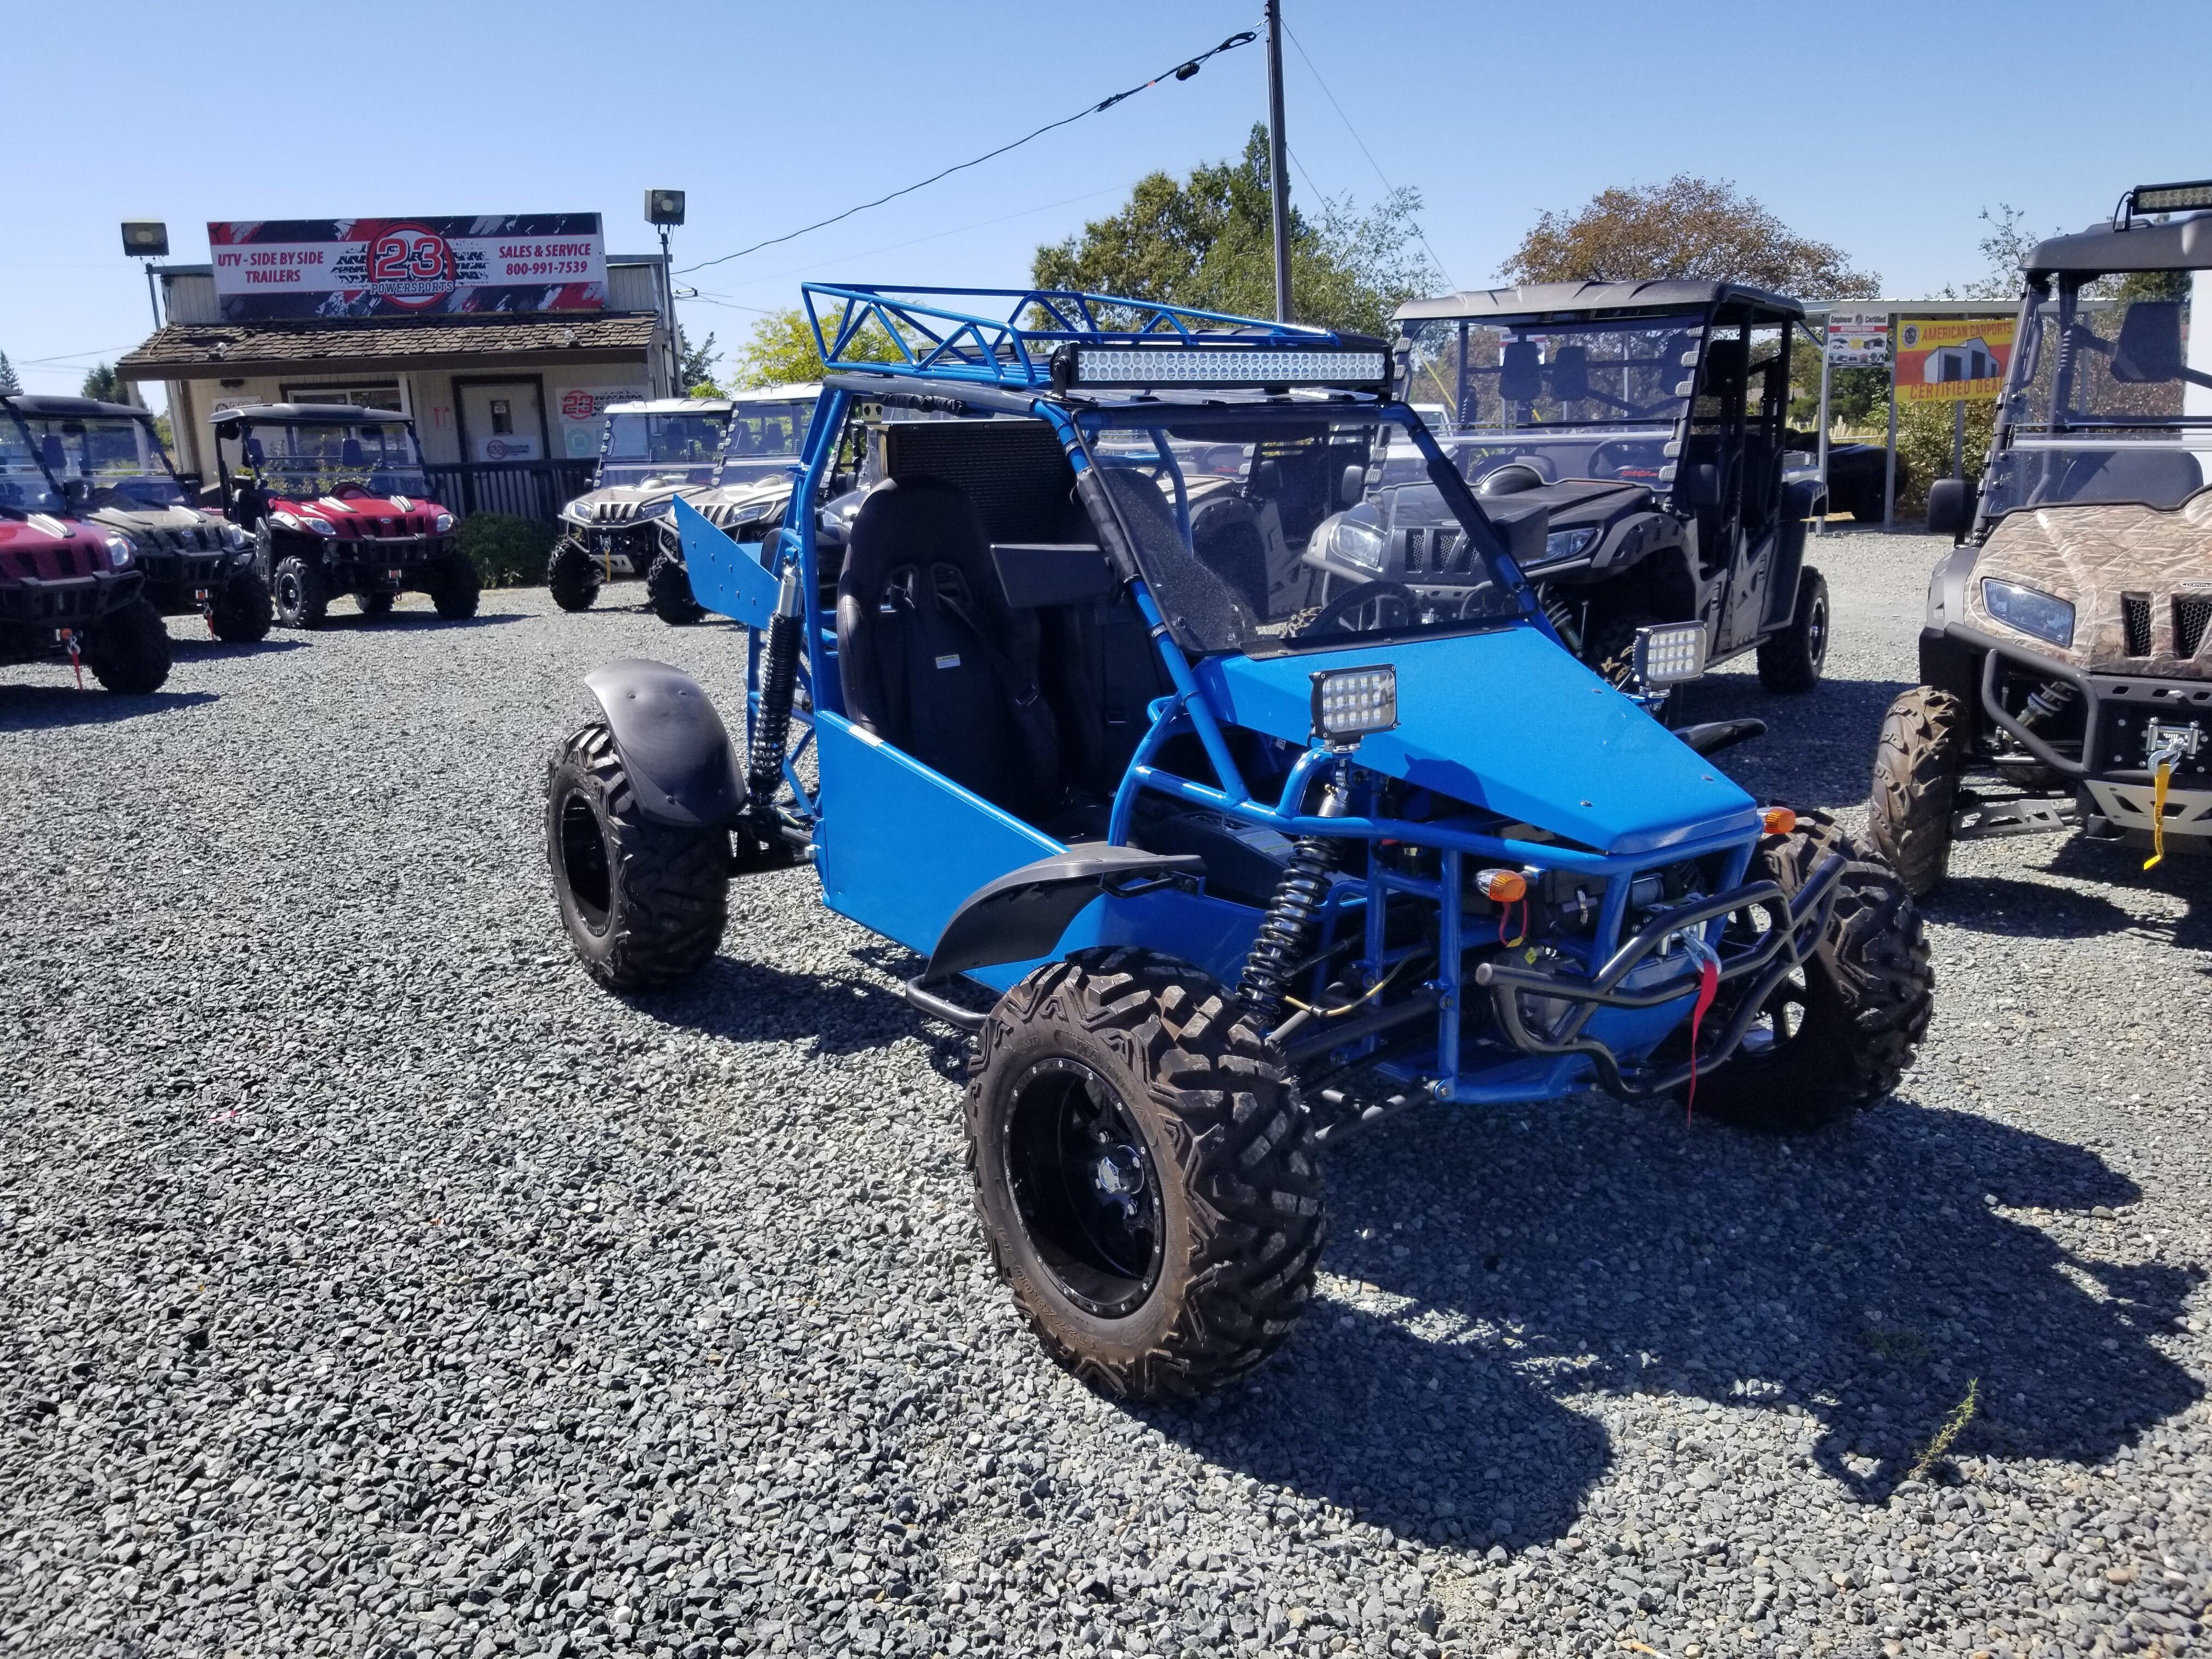 side by side buggies for sale